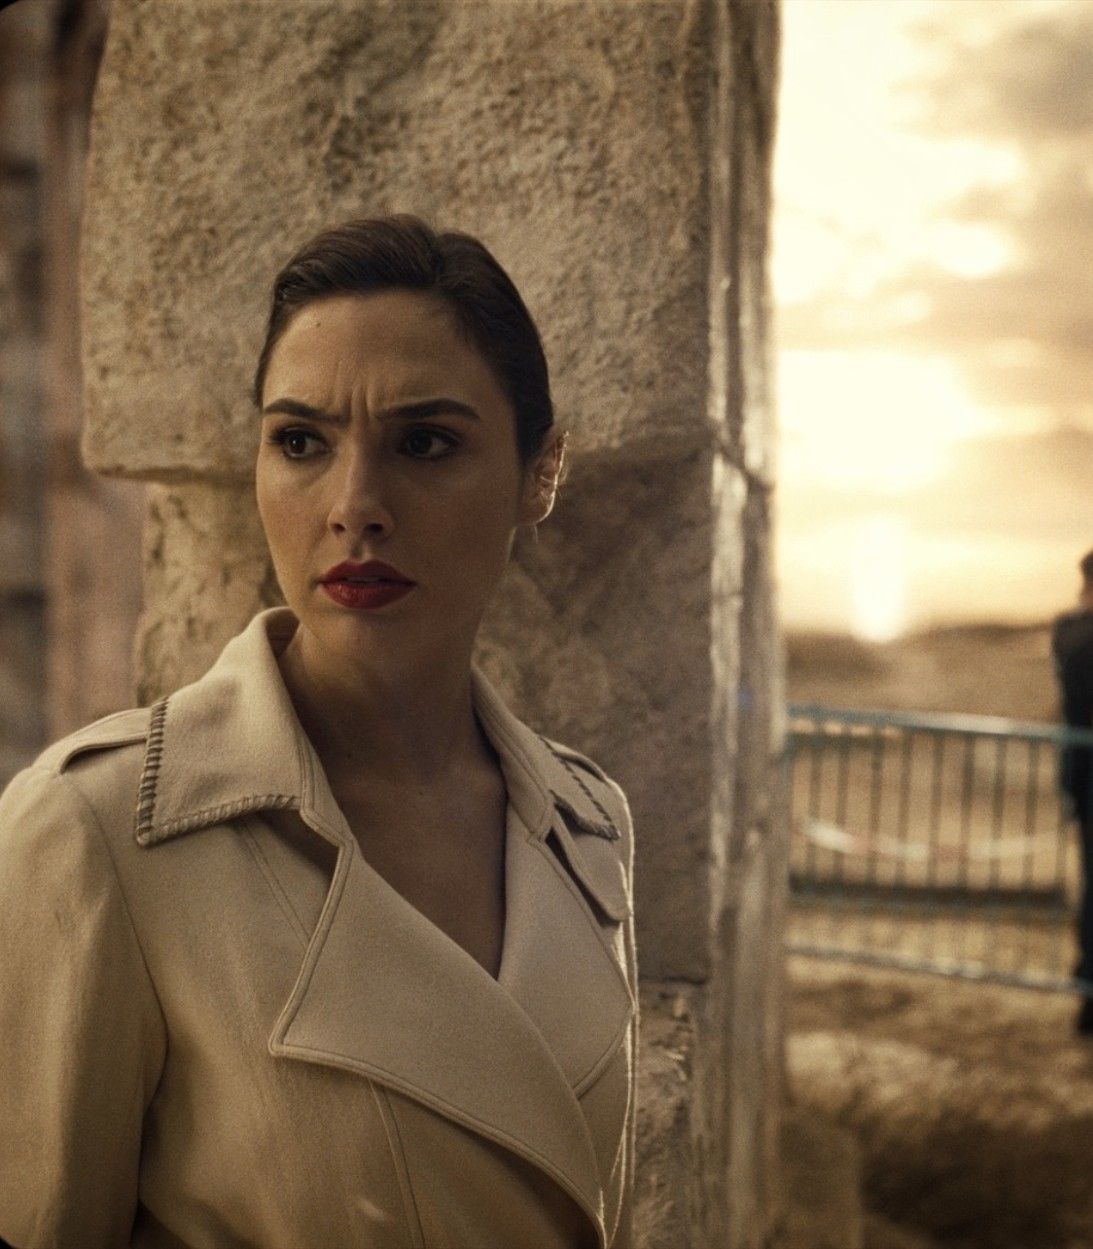 Wonder Woman (Gal Gadot) in Zack Snyder's Justice League